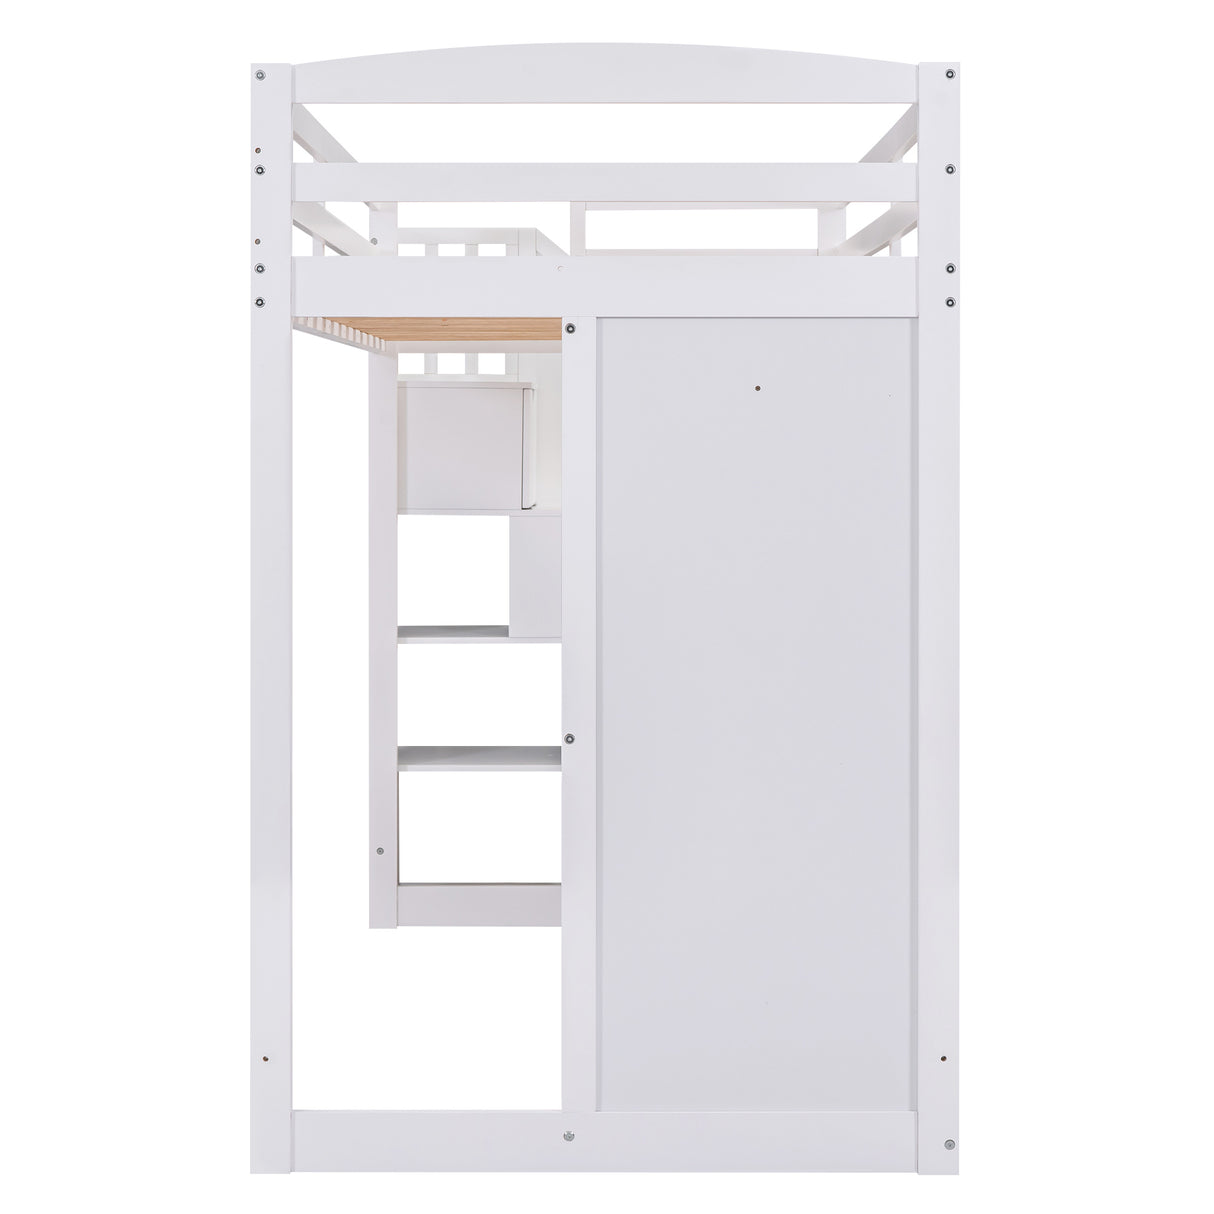 Twin Size Loft Bed with Wardrobe and Staircase, Desk and Storage Drawers and Cabinet in 1, White - Home Elegance USA